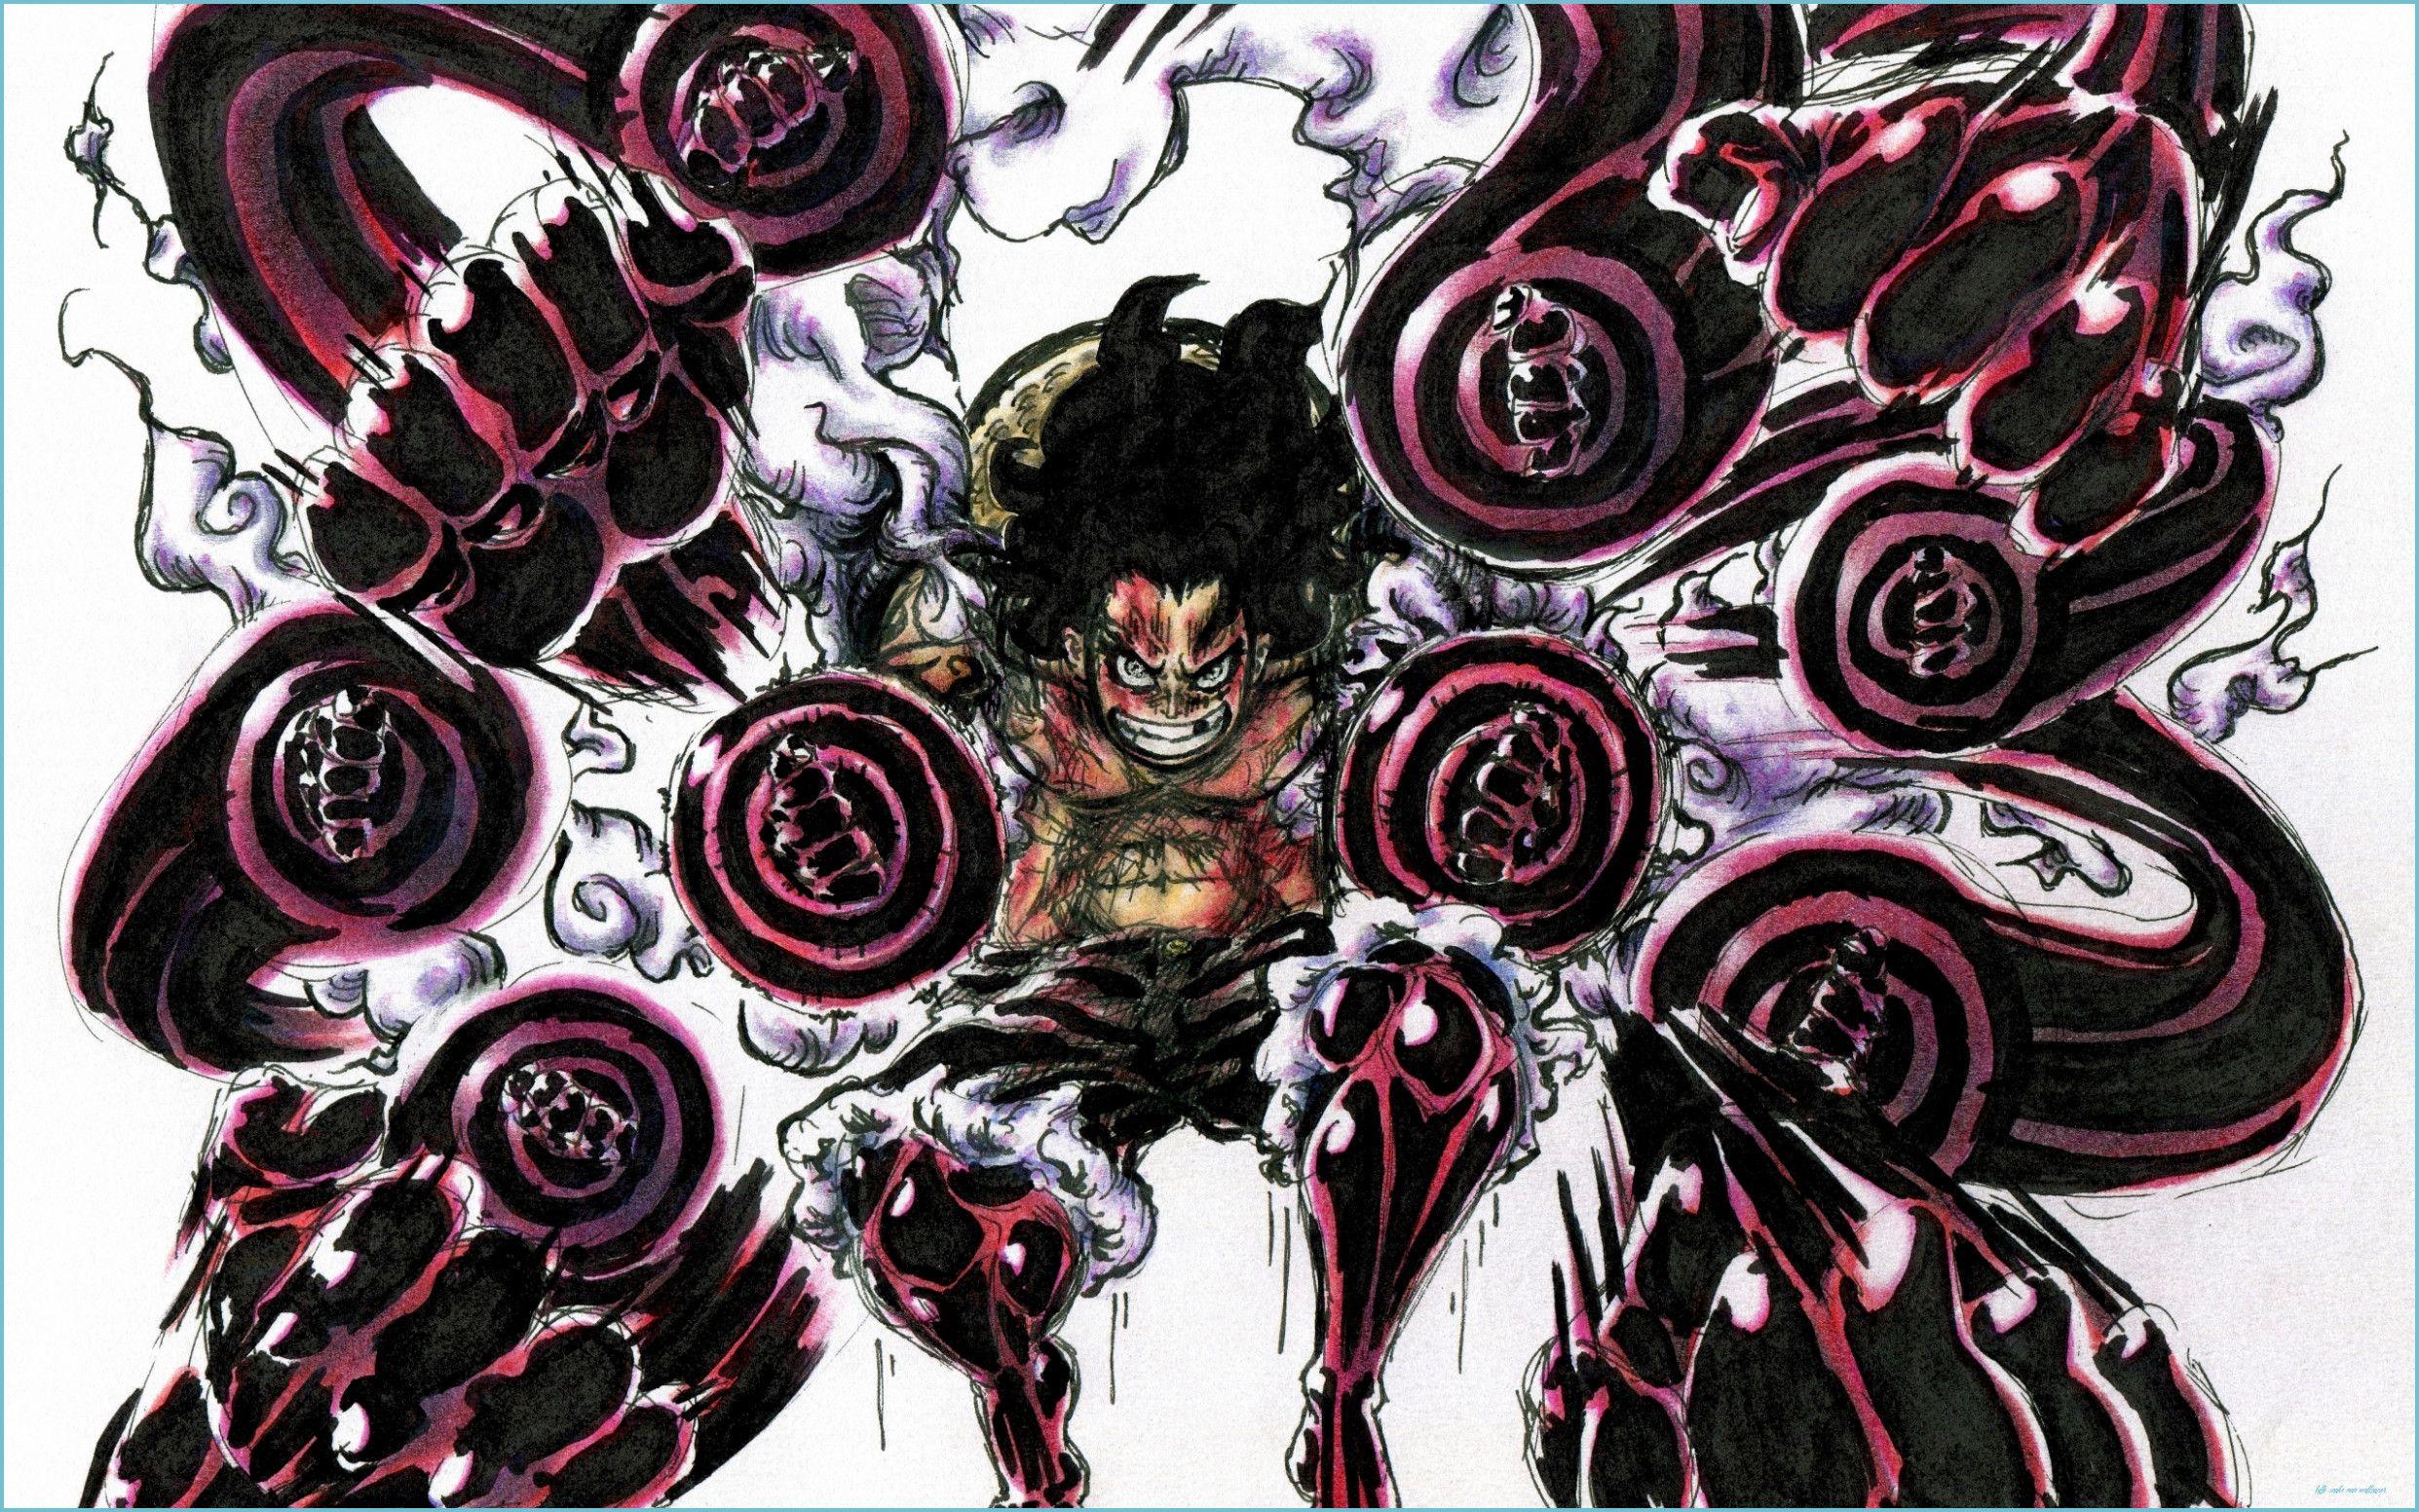 One Piece Gear 4 Wallpapers - Top Free One Piece Gear 4 Backgrounds